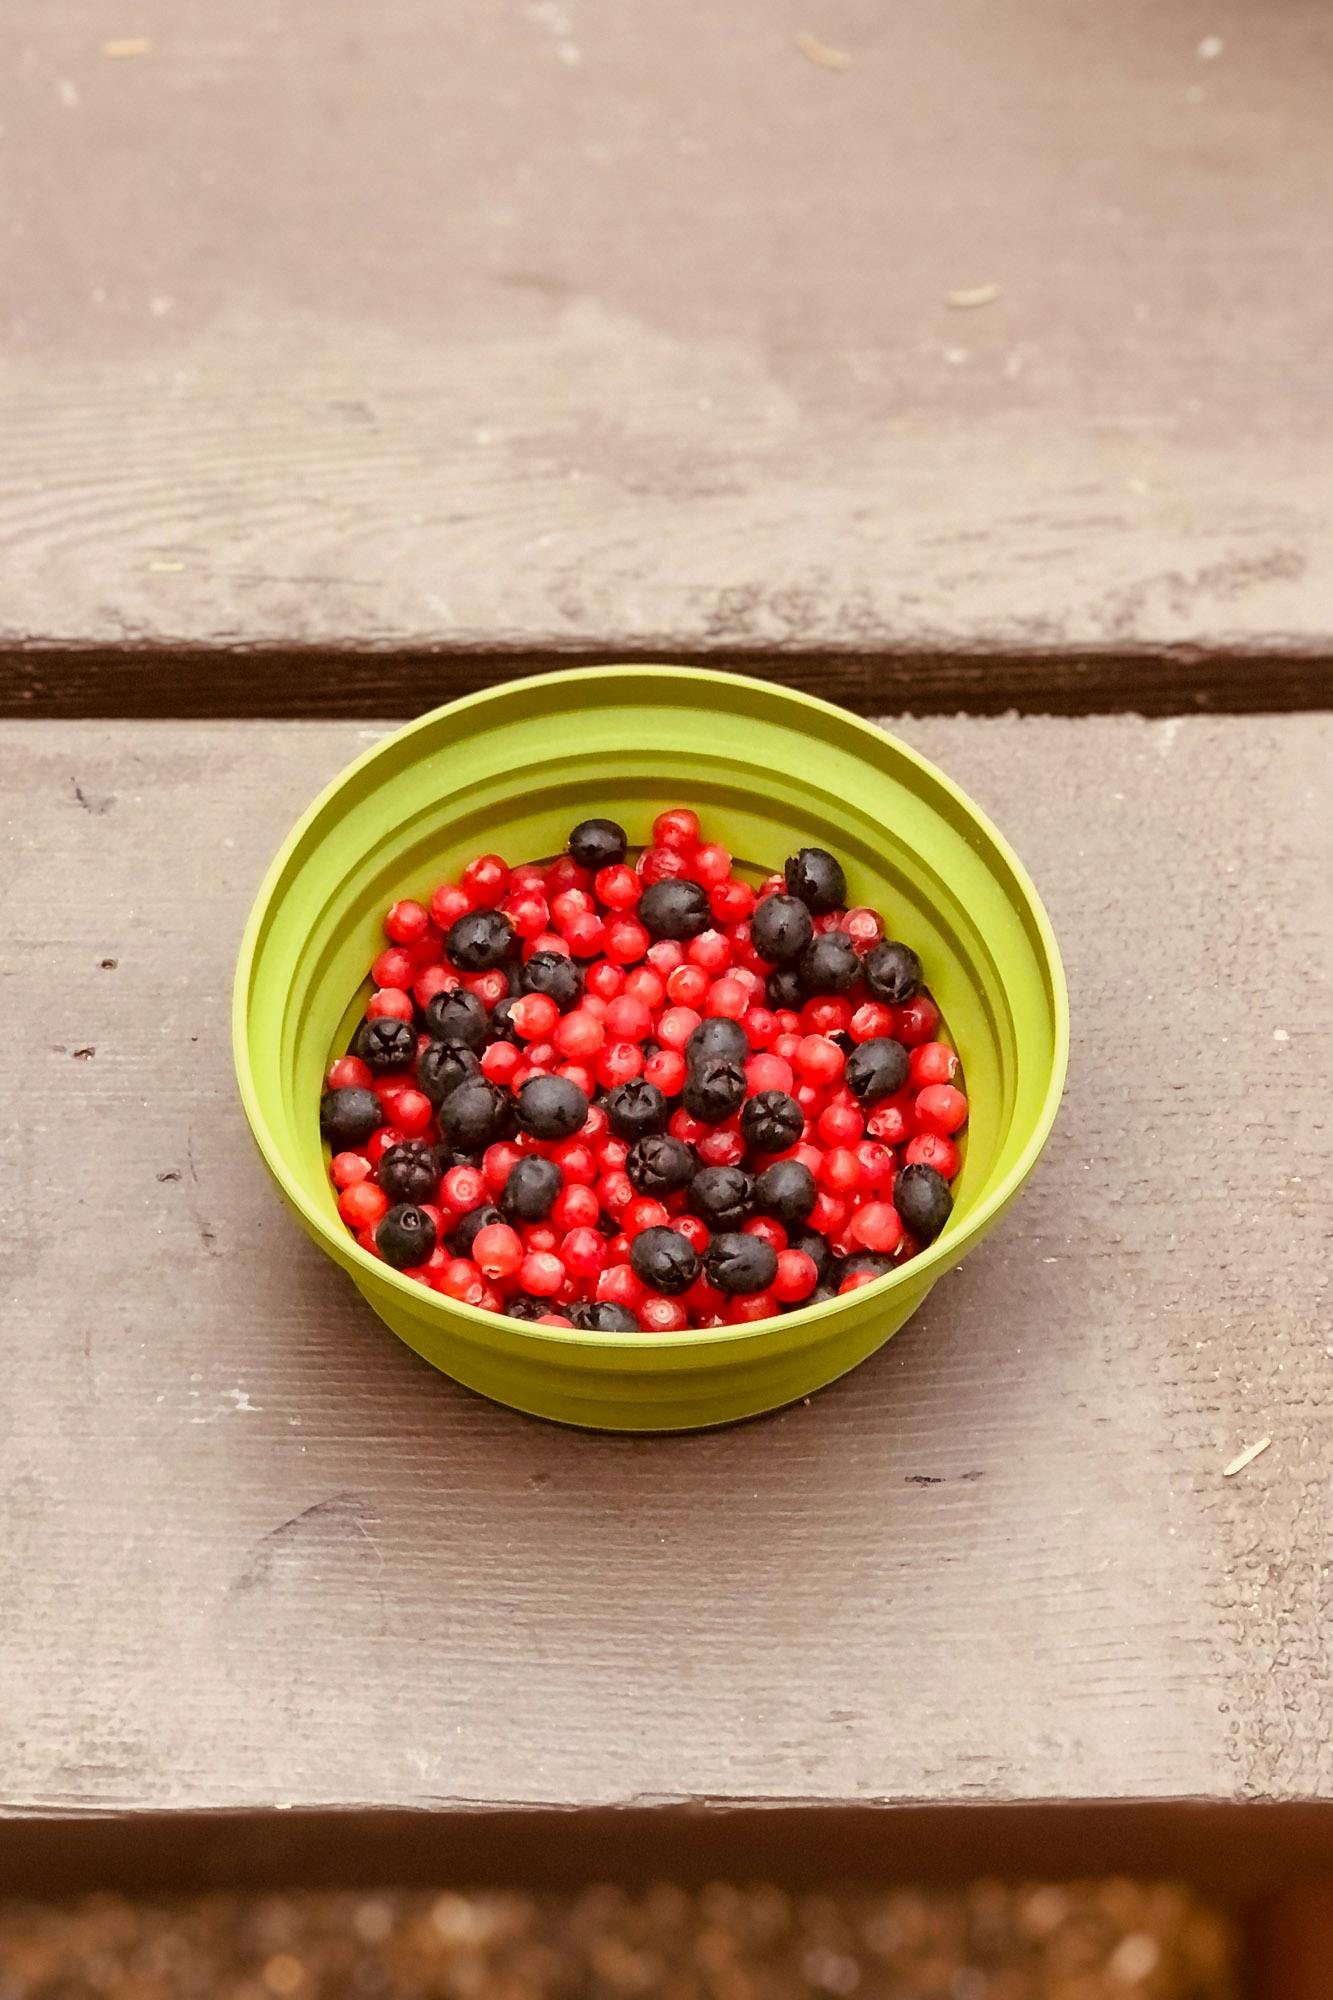 A bowl of salal berries.